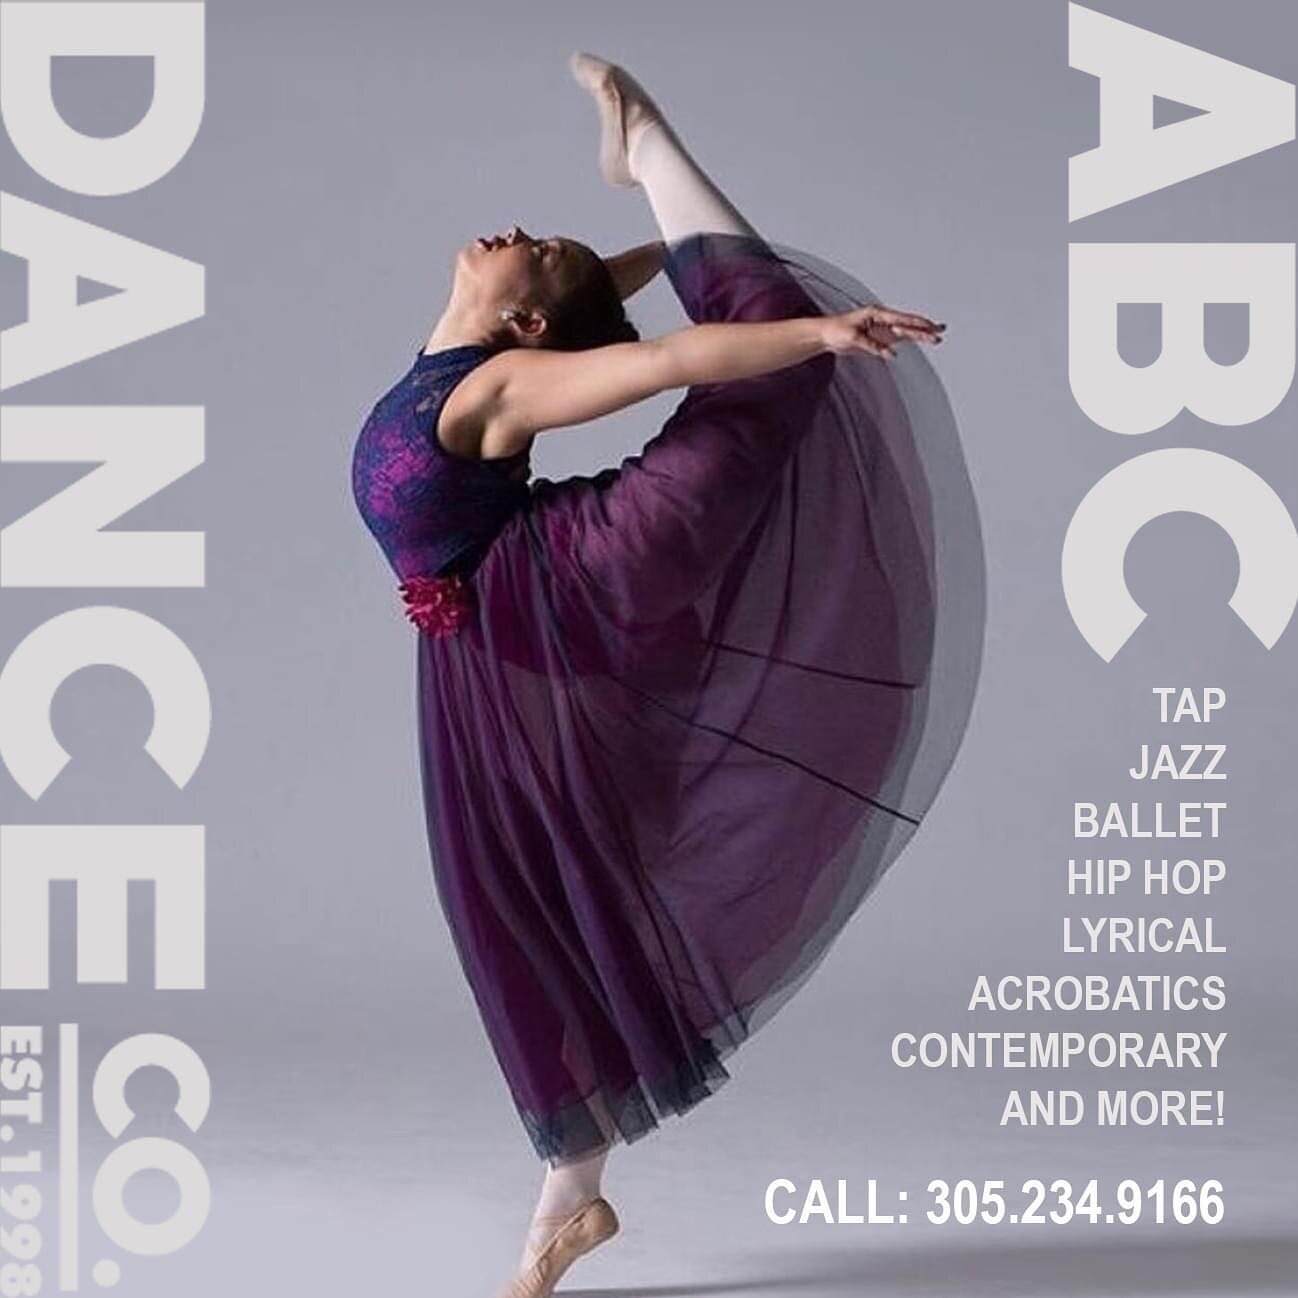 We offer a wide range of dance classes including ballet, tap, jazz, hip hop, contemporary and more! Visit our dance studio in Miami FL to learn more or give us a call at 305.234.9166. www.abcdancemiami.com #balletclass  #tapdance #jazzclass #hiphopda